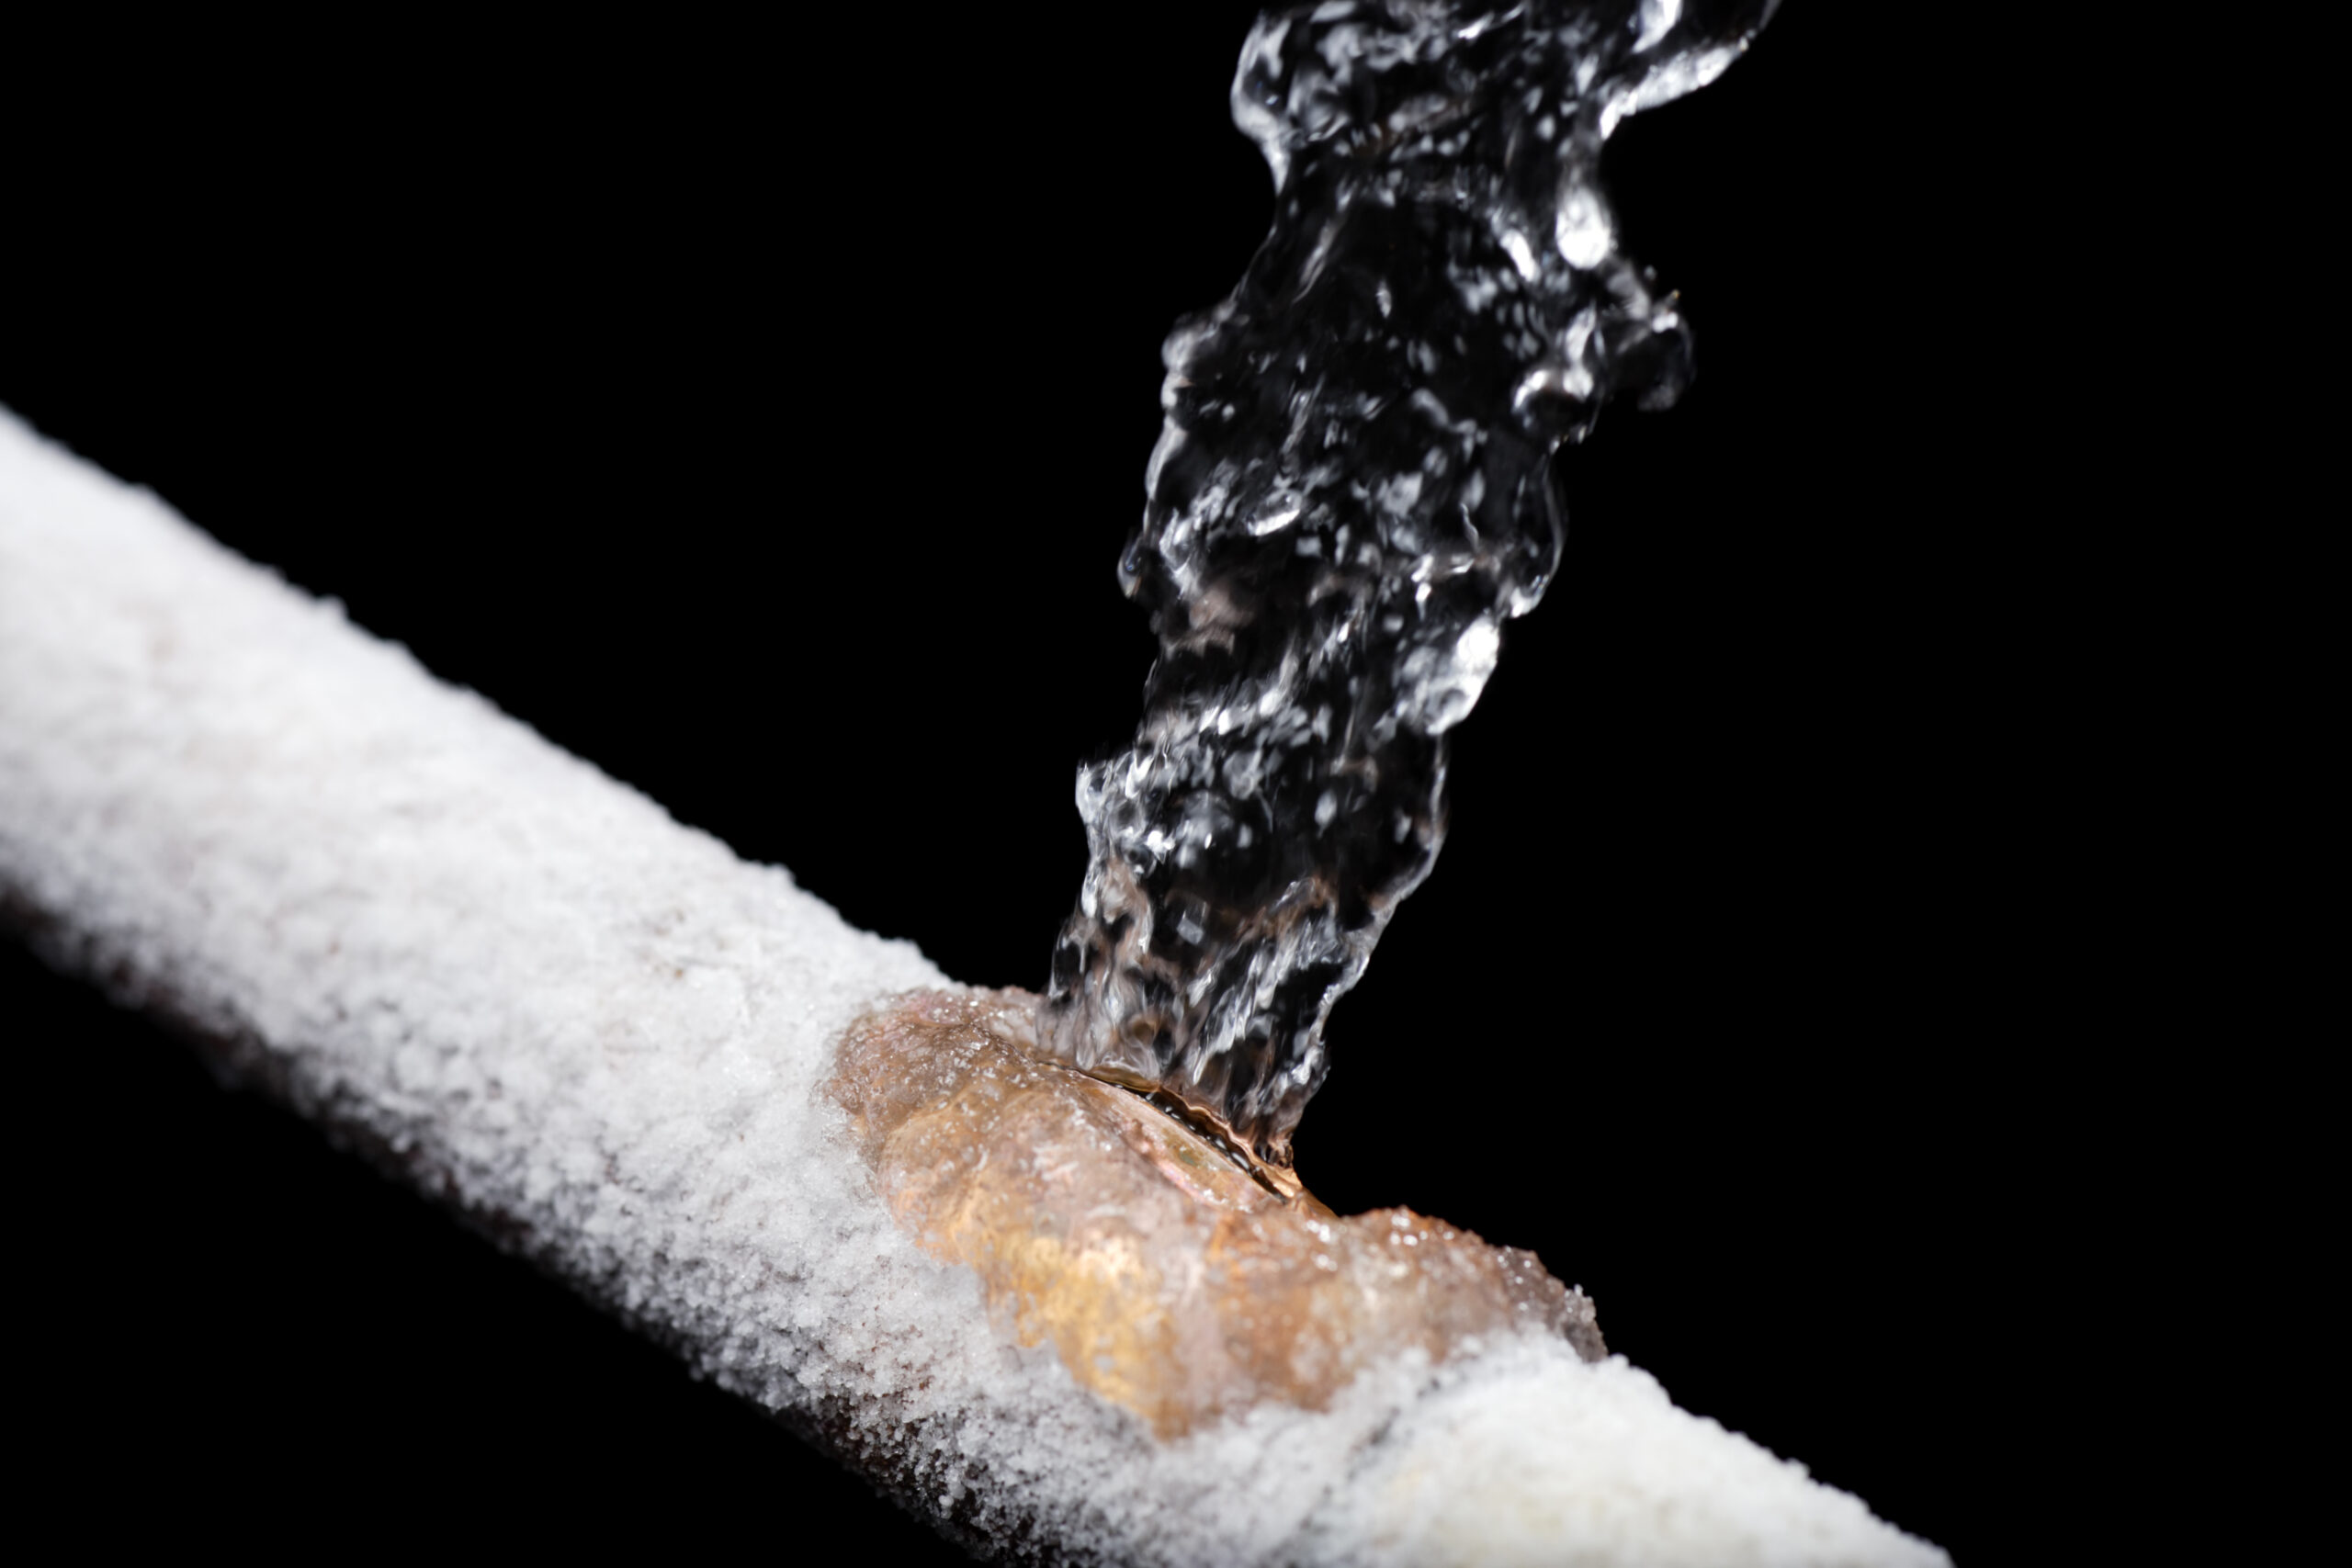 How To Prevent Frozen Pipes